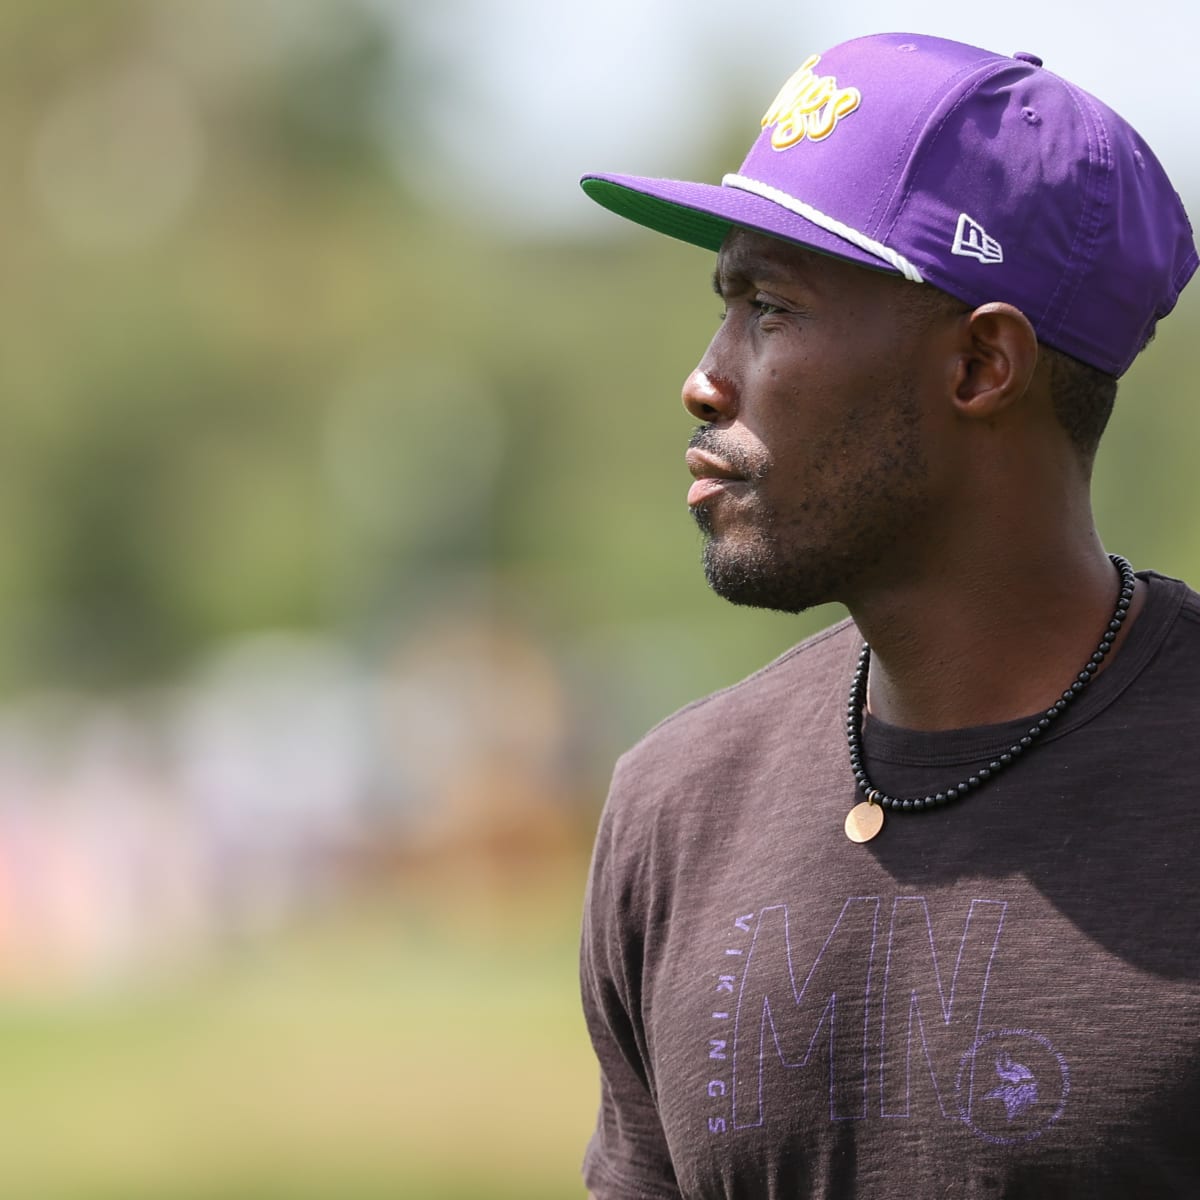 Vikings finalizing 53-man roster with about dozen spots available